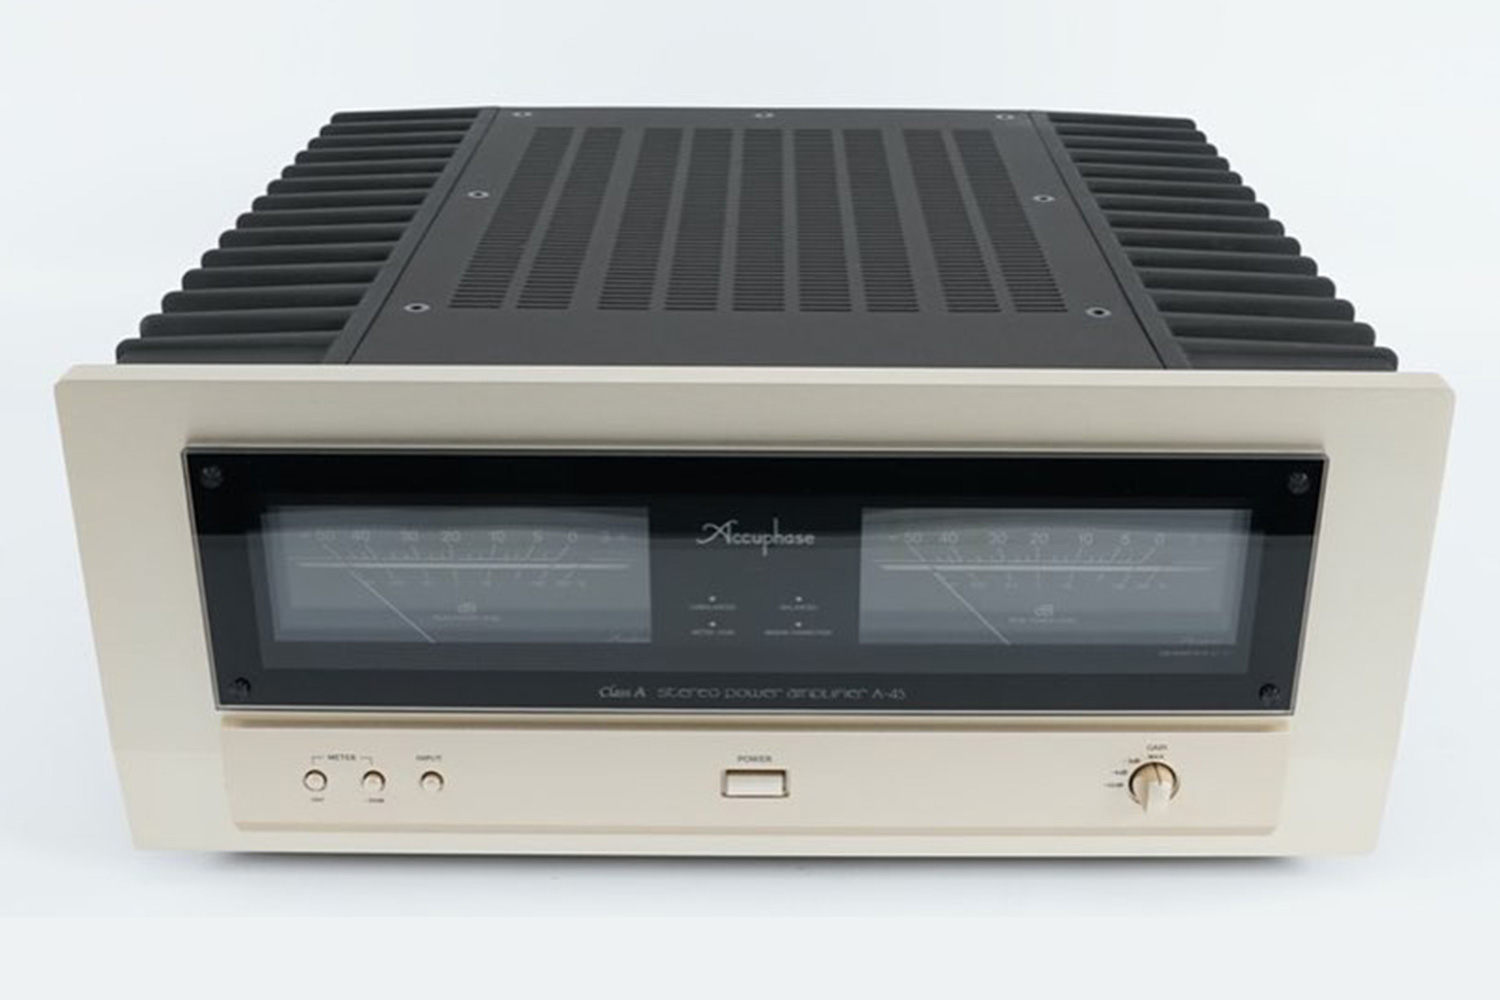 Accuphase A-45 – High End Stereo Equipment We Buy